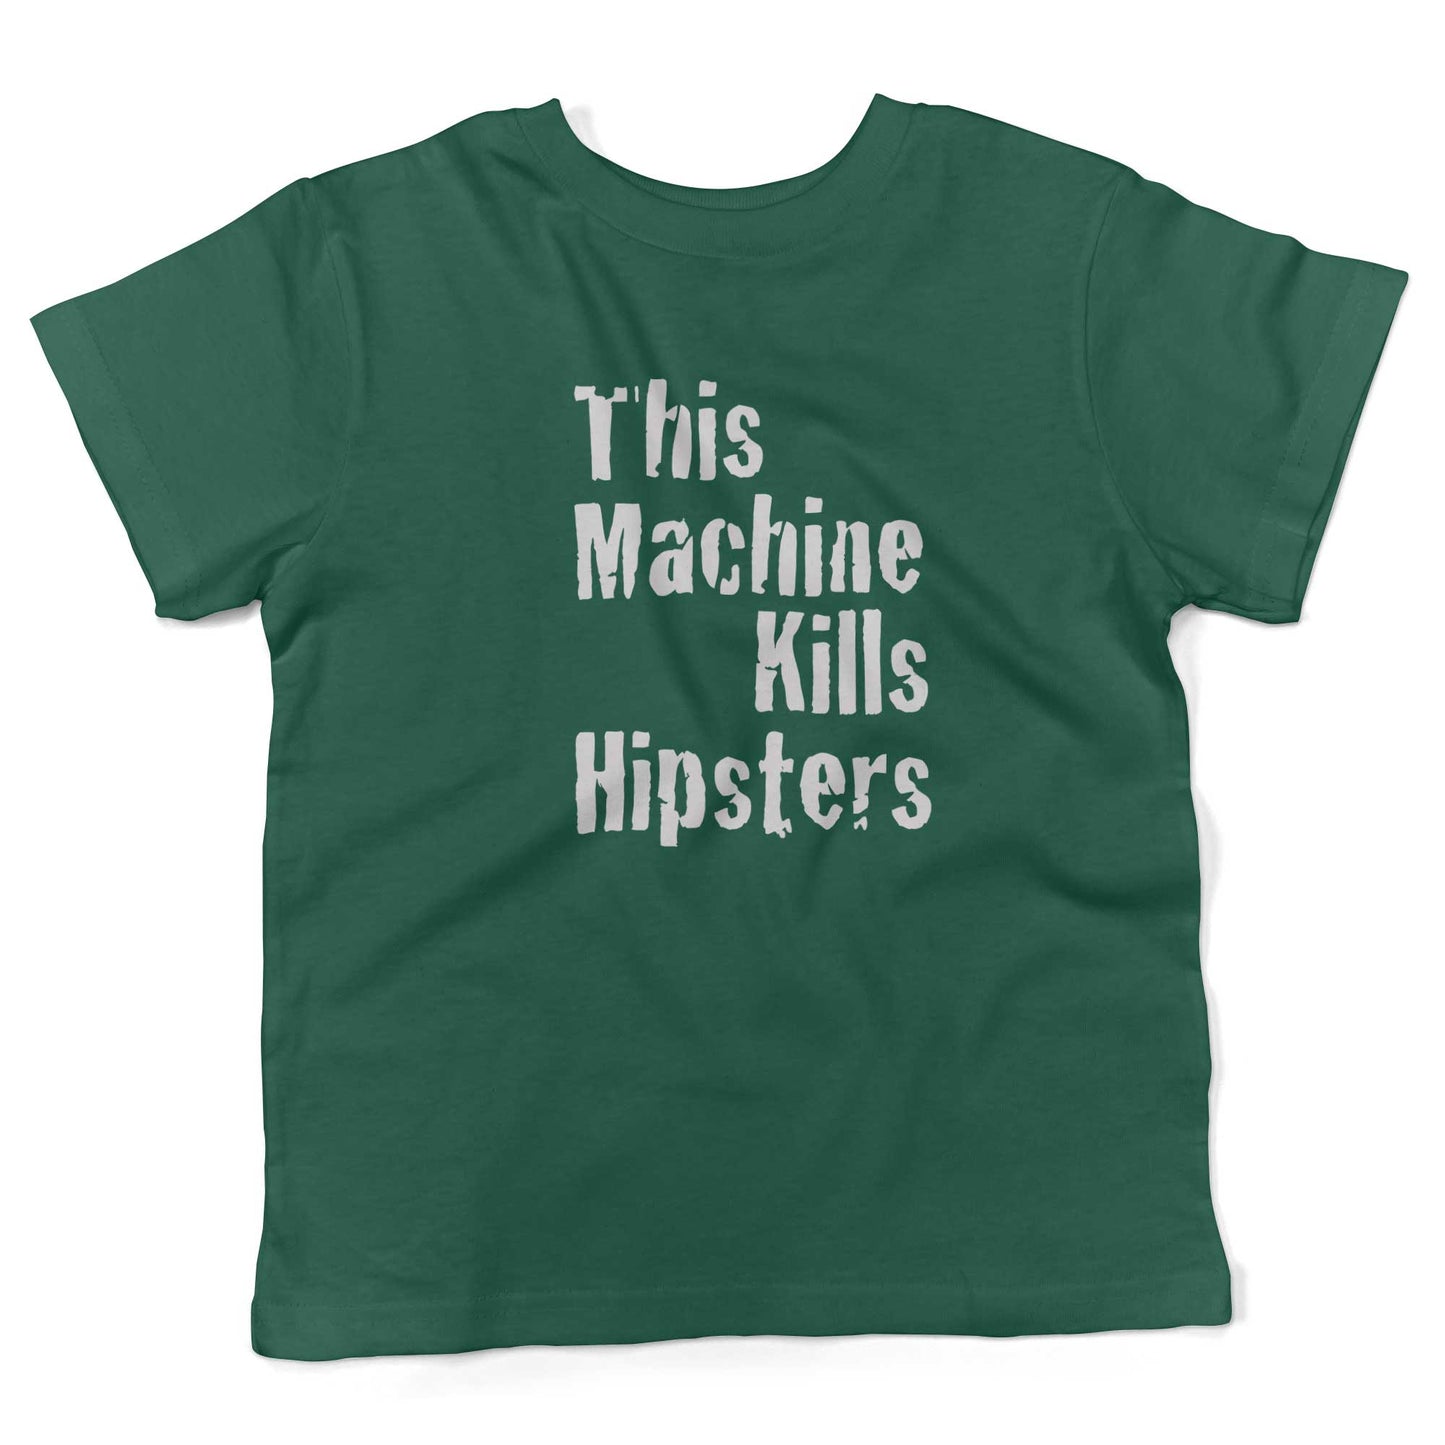 This Machine Kills Hipsters Toddler Shirt-Kelly Green-2T